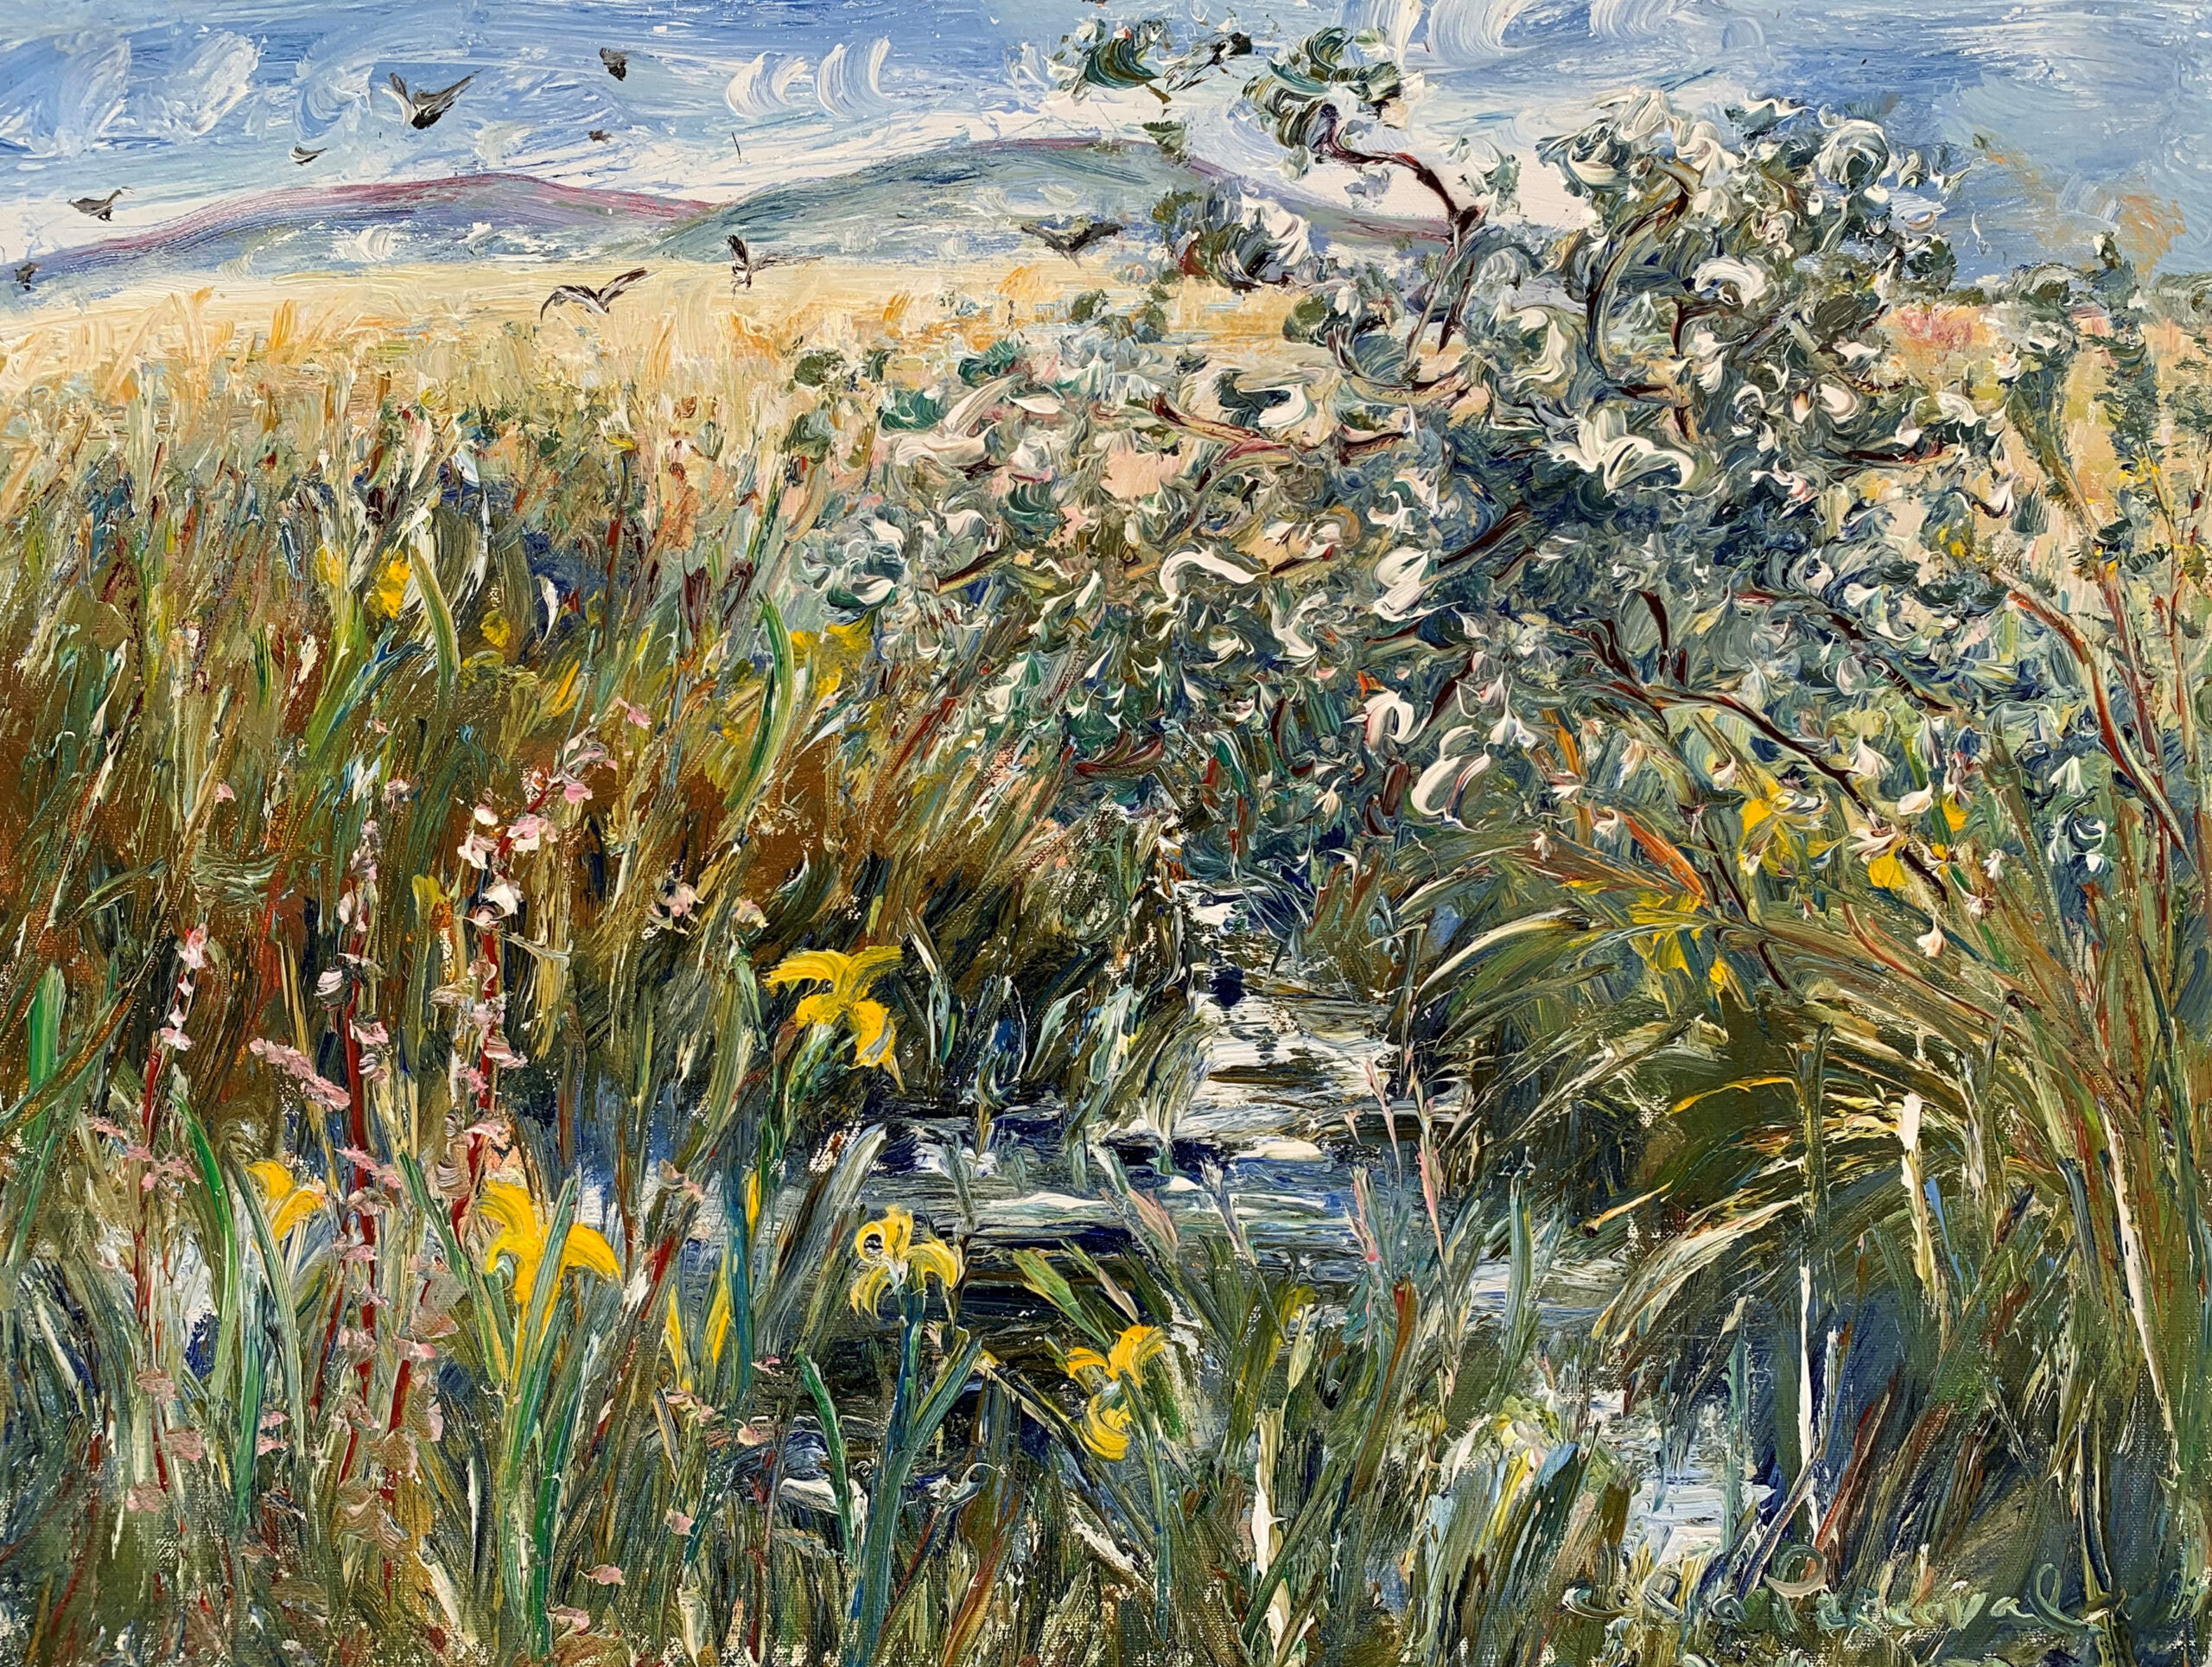 Perceval-Wild Yellow Iris In The Creek (at Coen Kerry Ireland)-oil on canvas-46 x 61cm-master